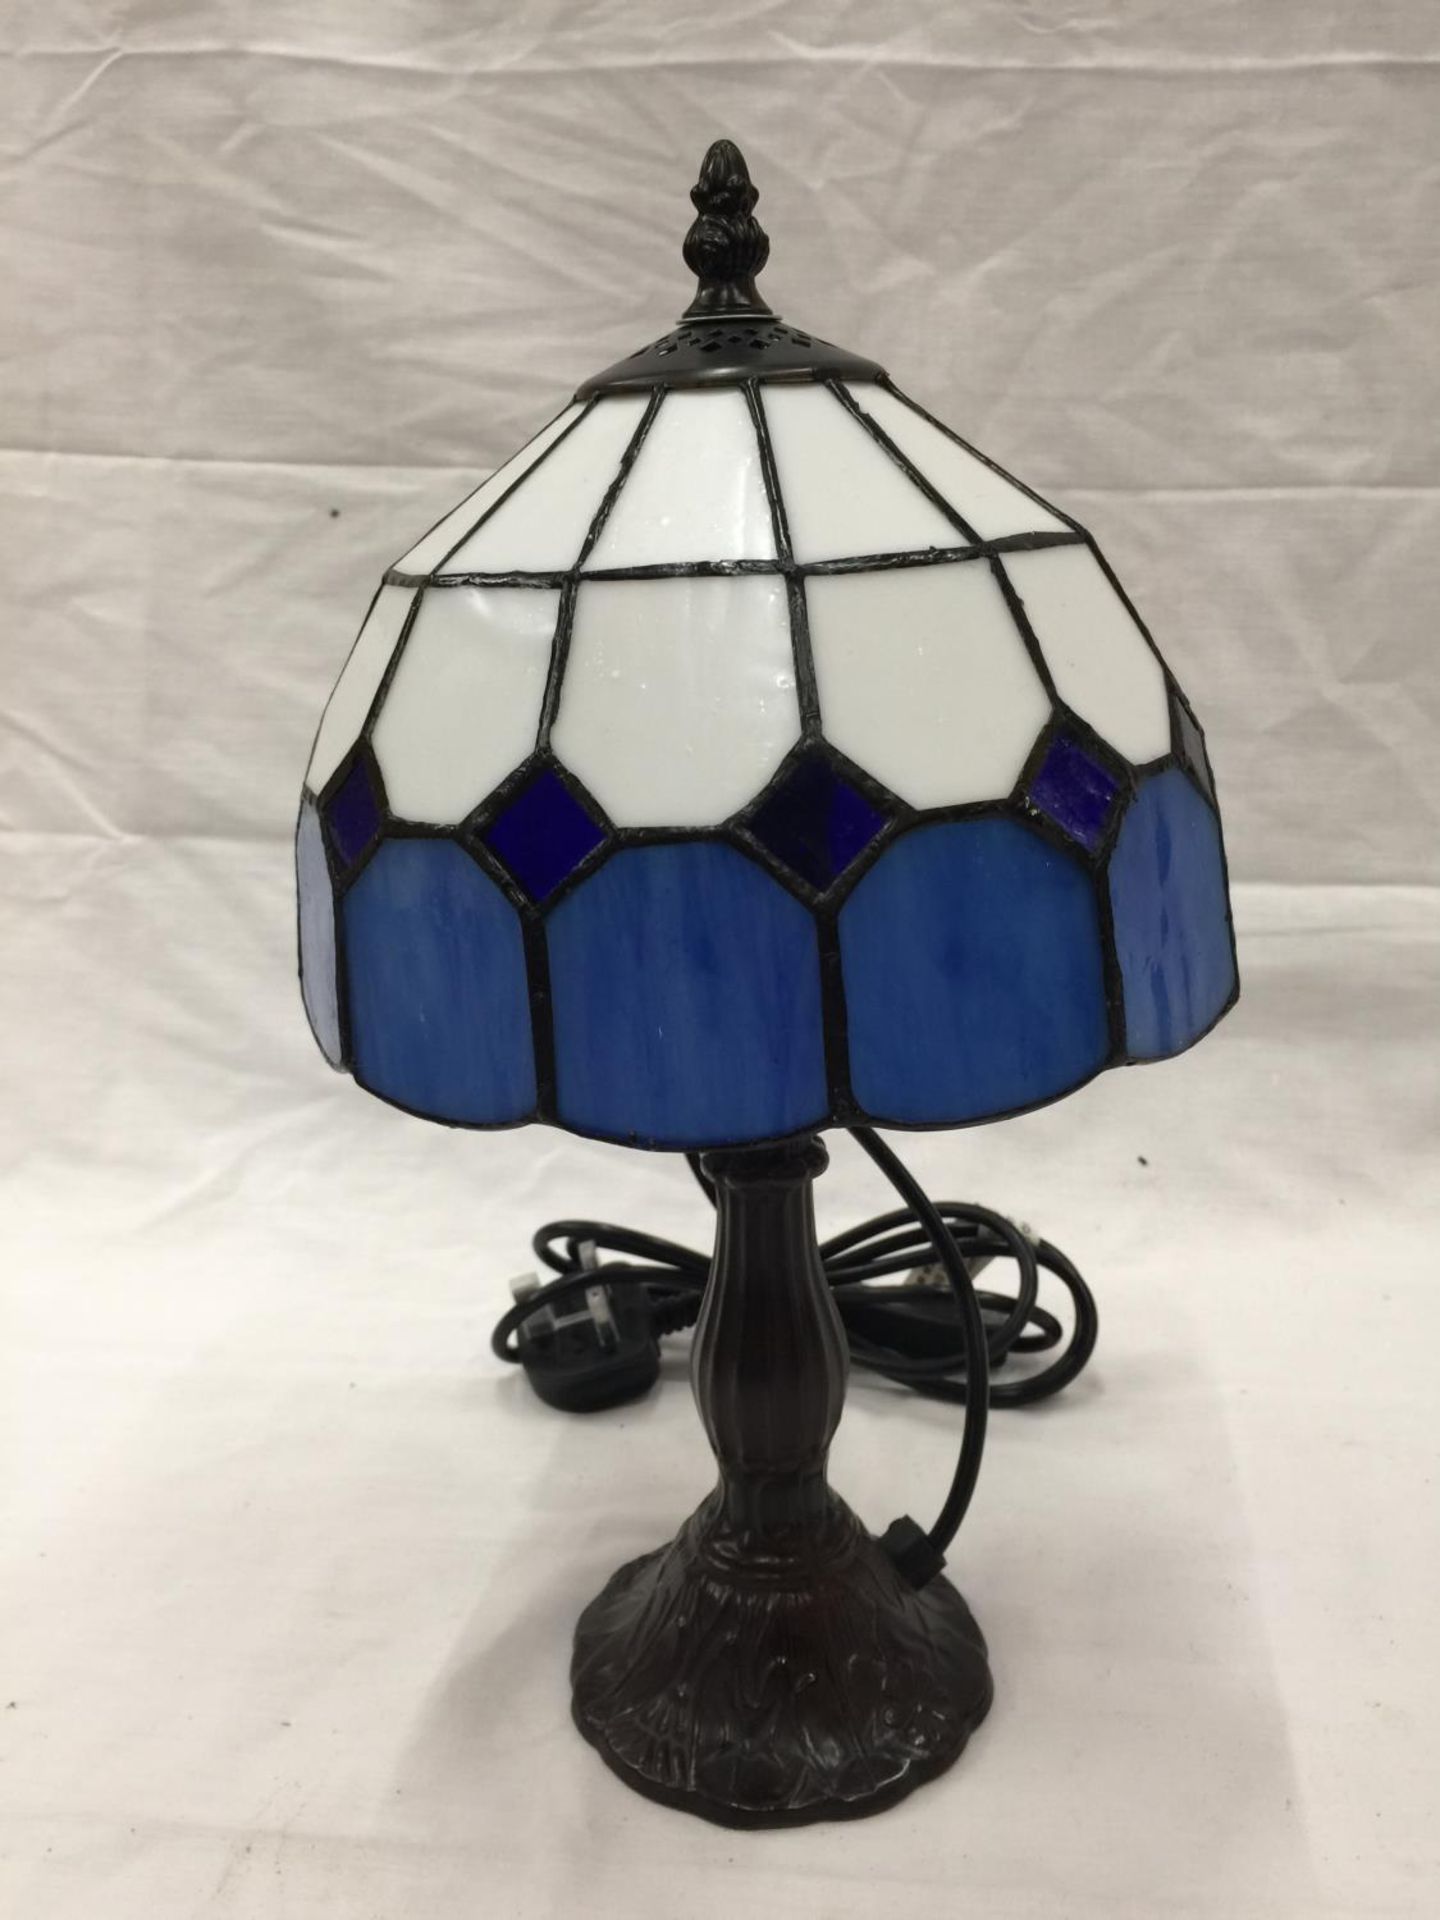 A STAINED GLASS TIFFANY STYLE LAMP ON A METAL BASE H: 35CM - Image 4 of 6